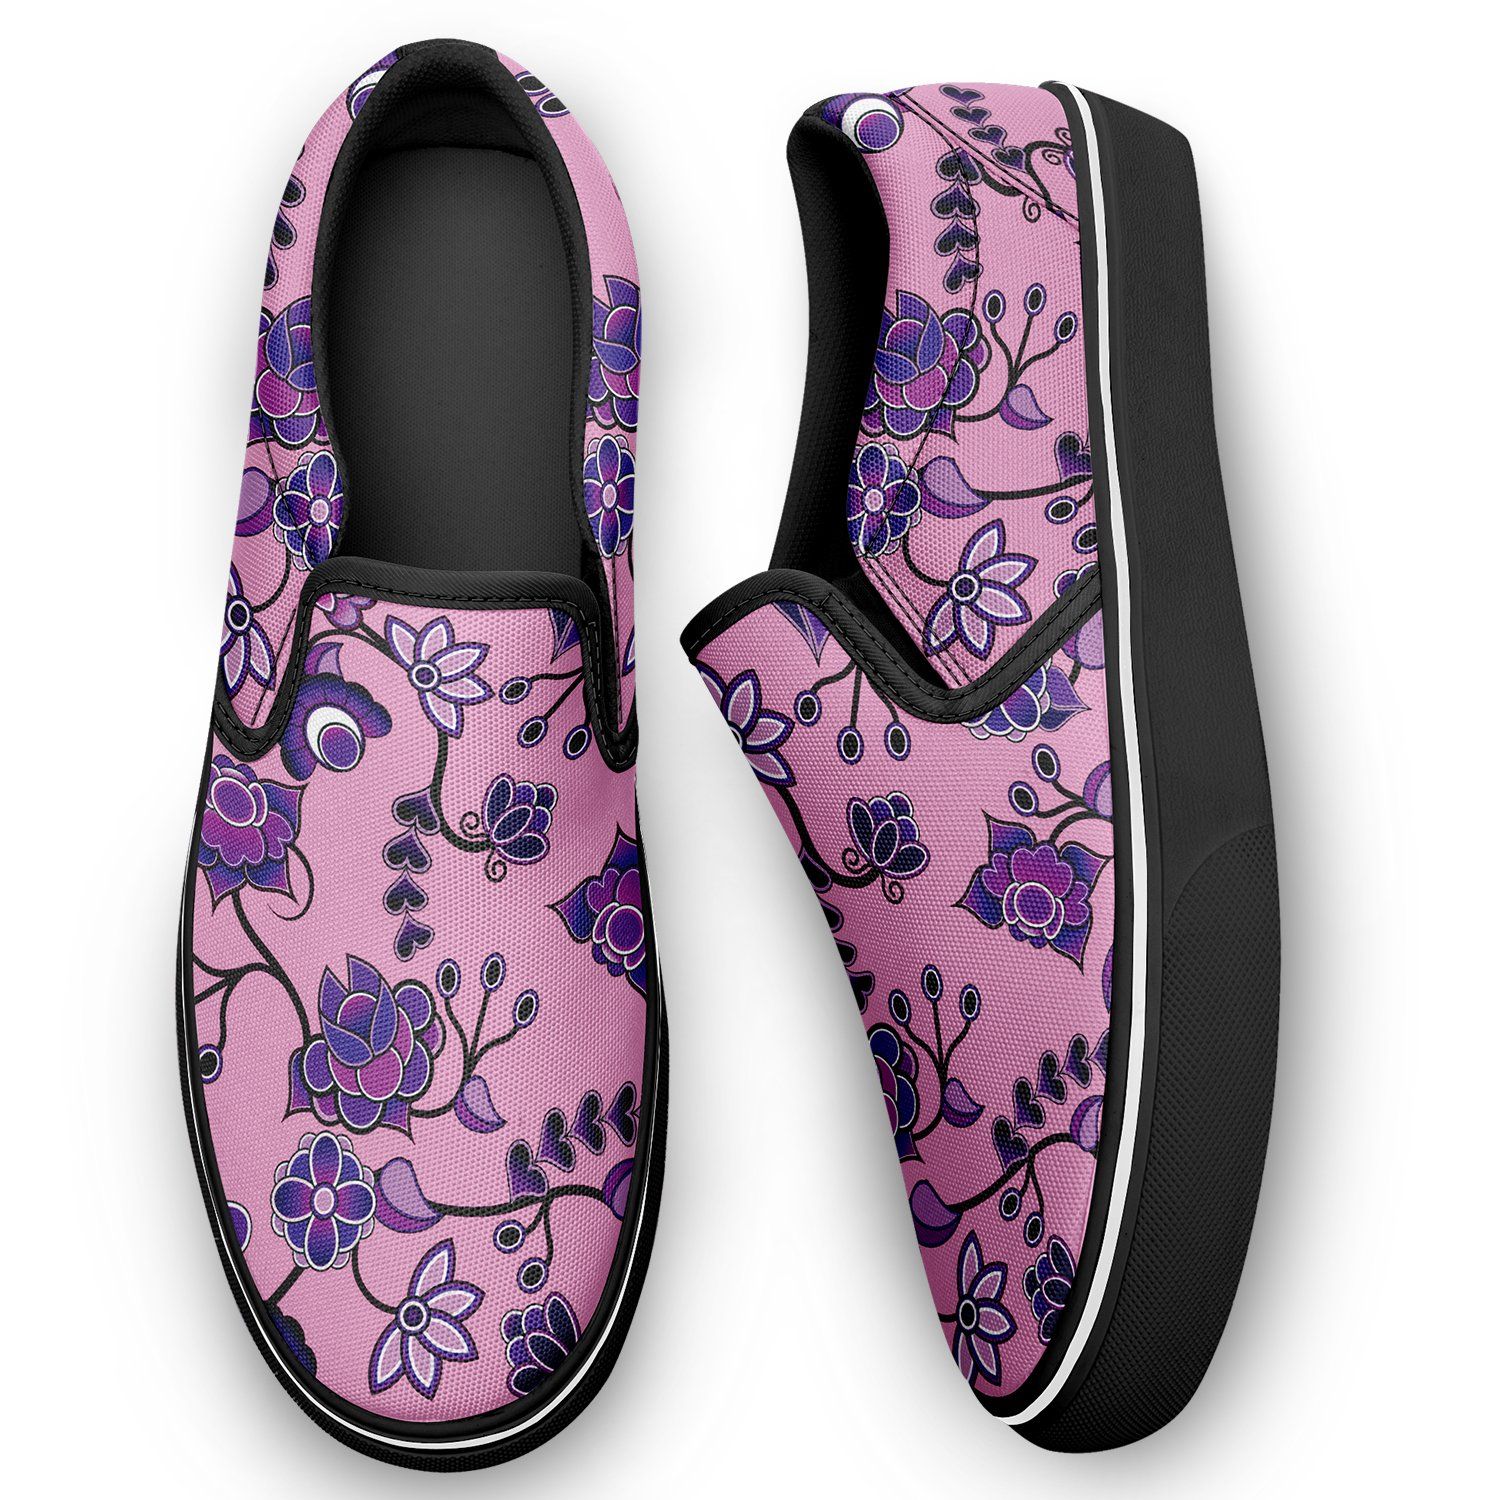 Purple Floral Amour Otoyimm Canvas Slip On Shoes otoyimm Herman 